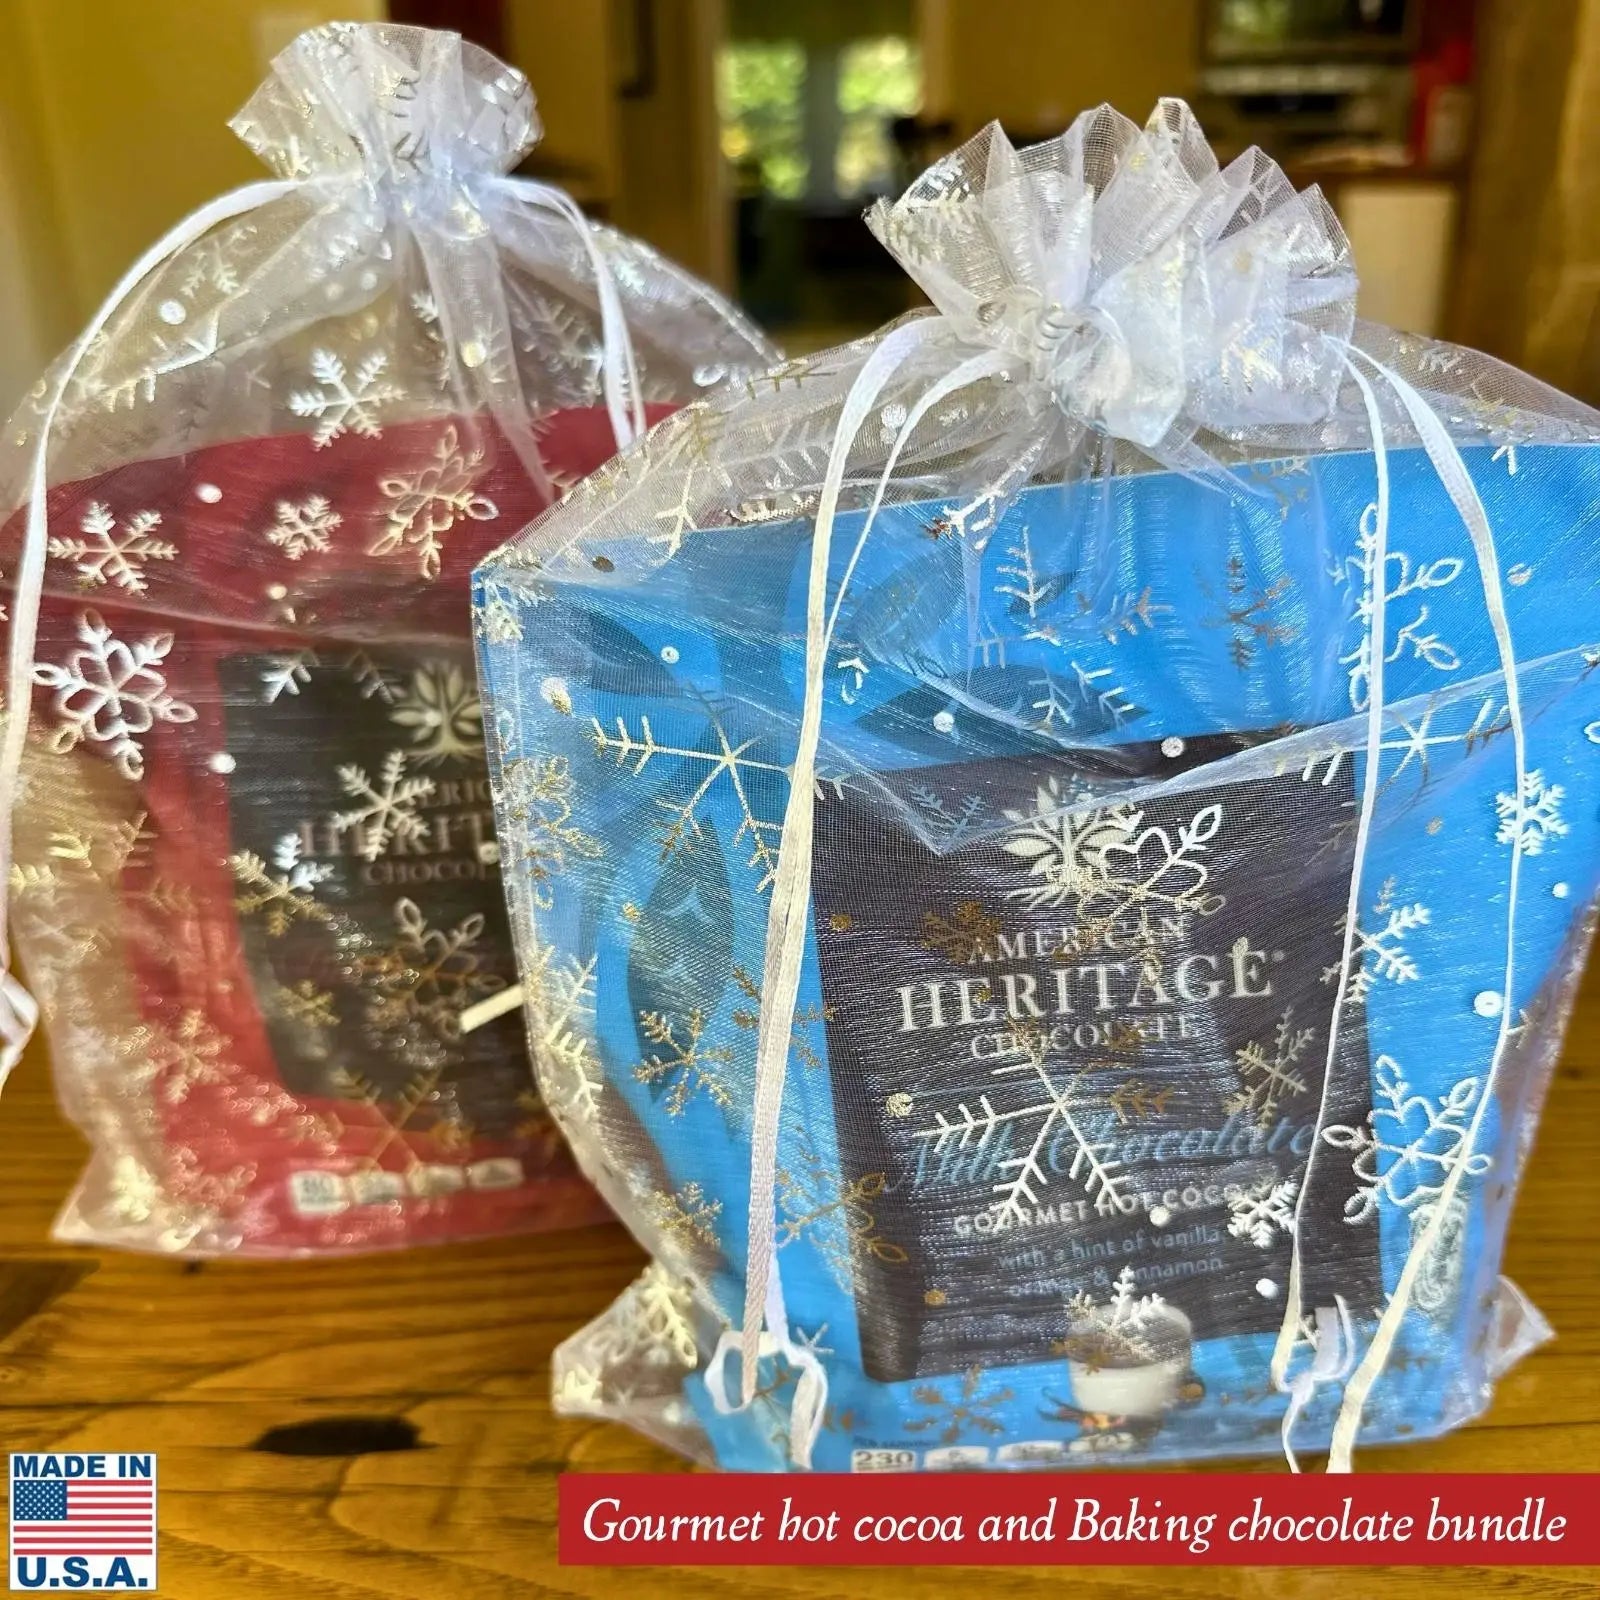 Heritage Gourmet Hot Cocoa and baking chocolate bundle for History Lovers from The History List store